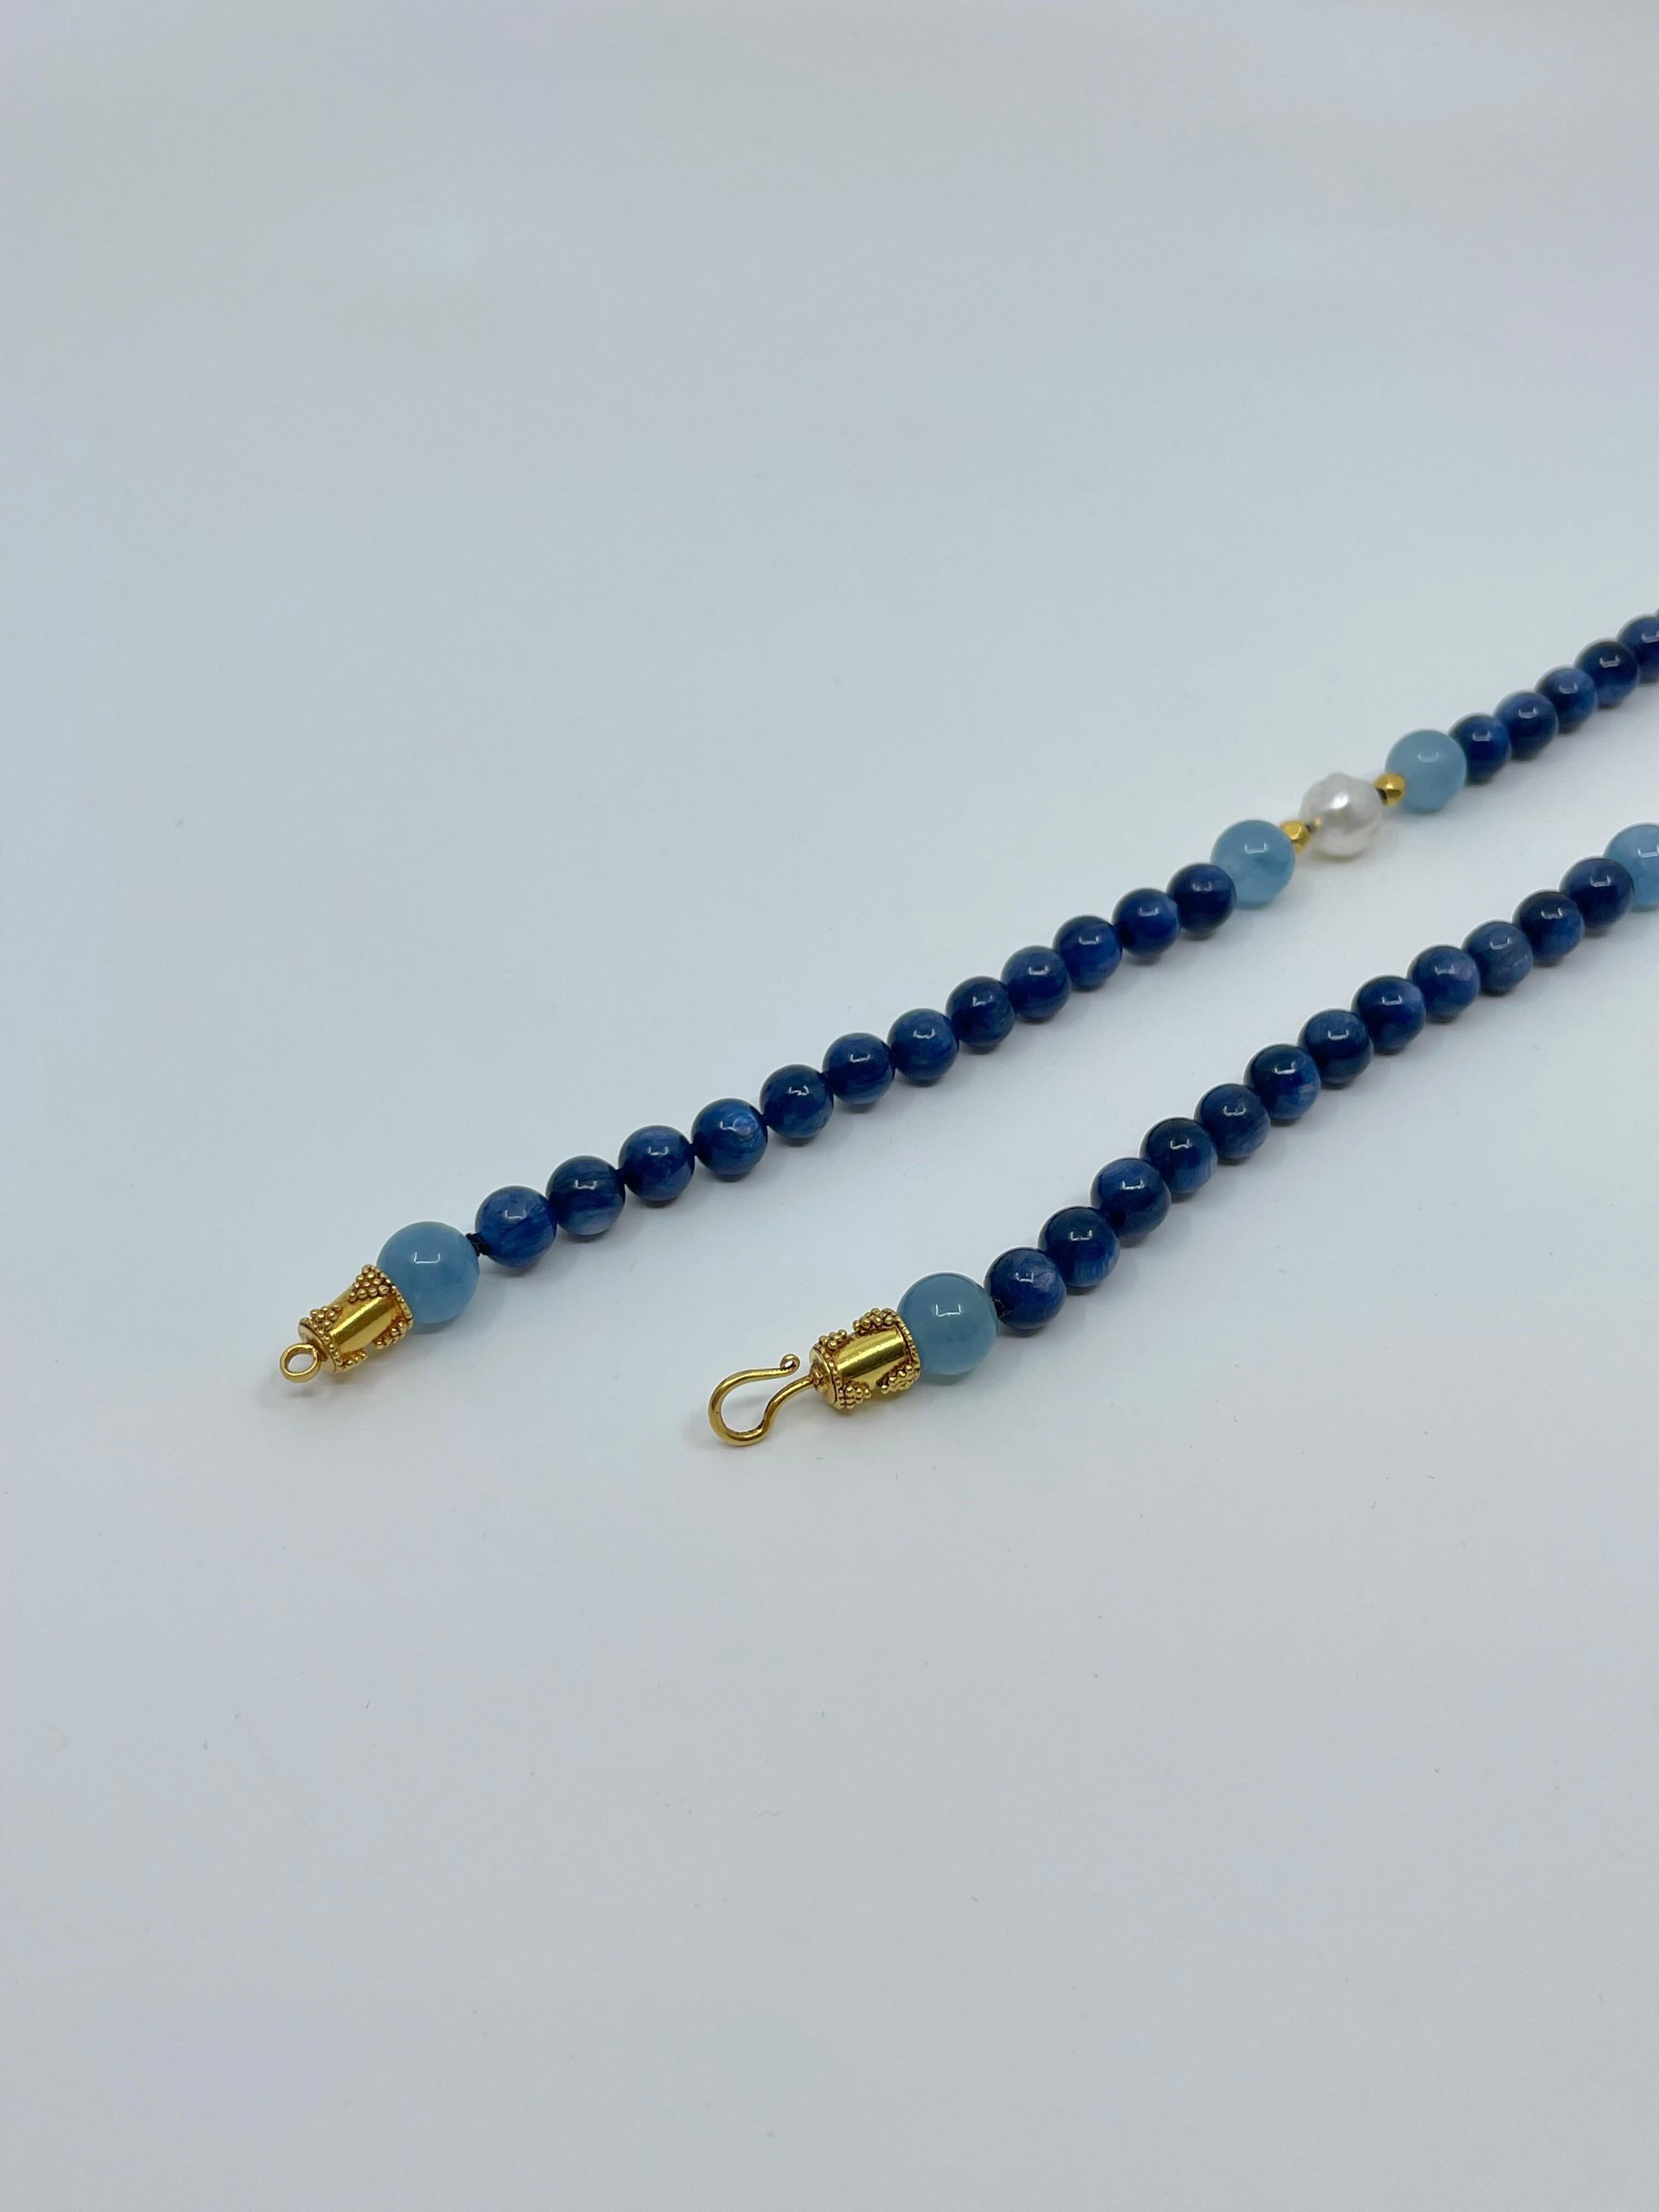 Long Necklace with Kyanite, Aquamarine, South Sea Pearls & 18K Solid Gold Beads For Sale 11